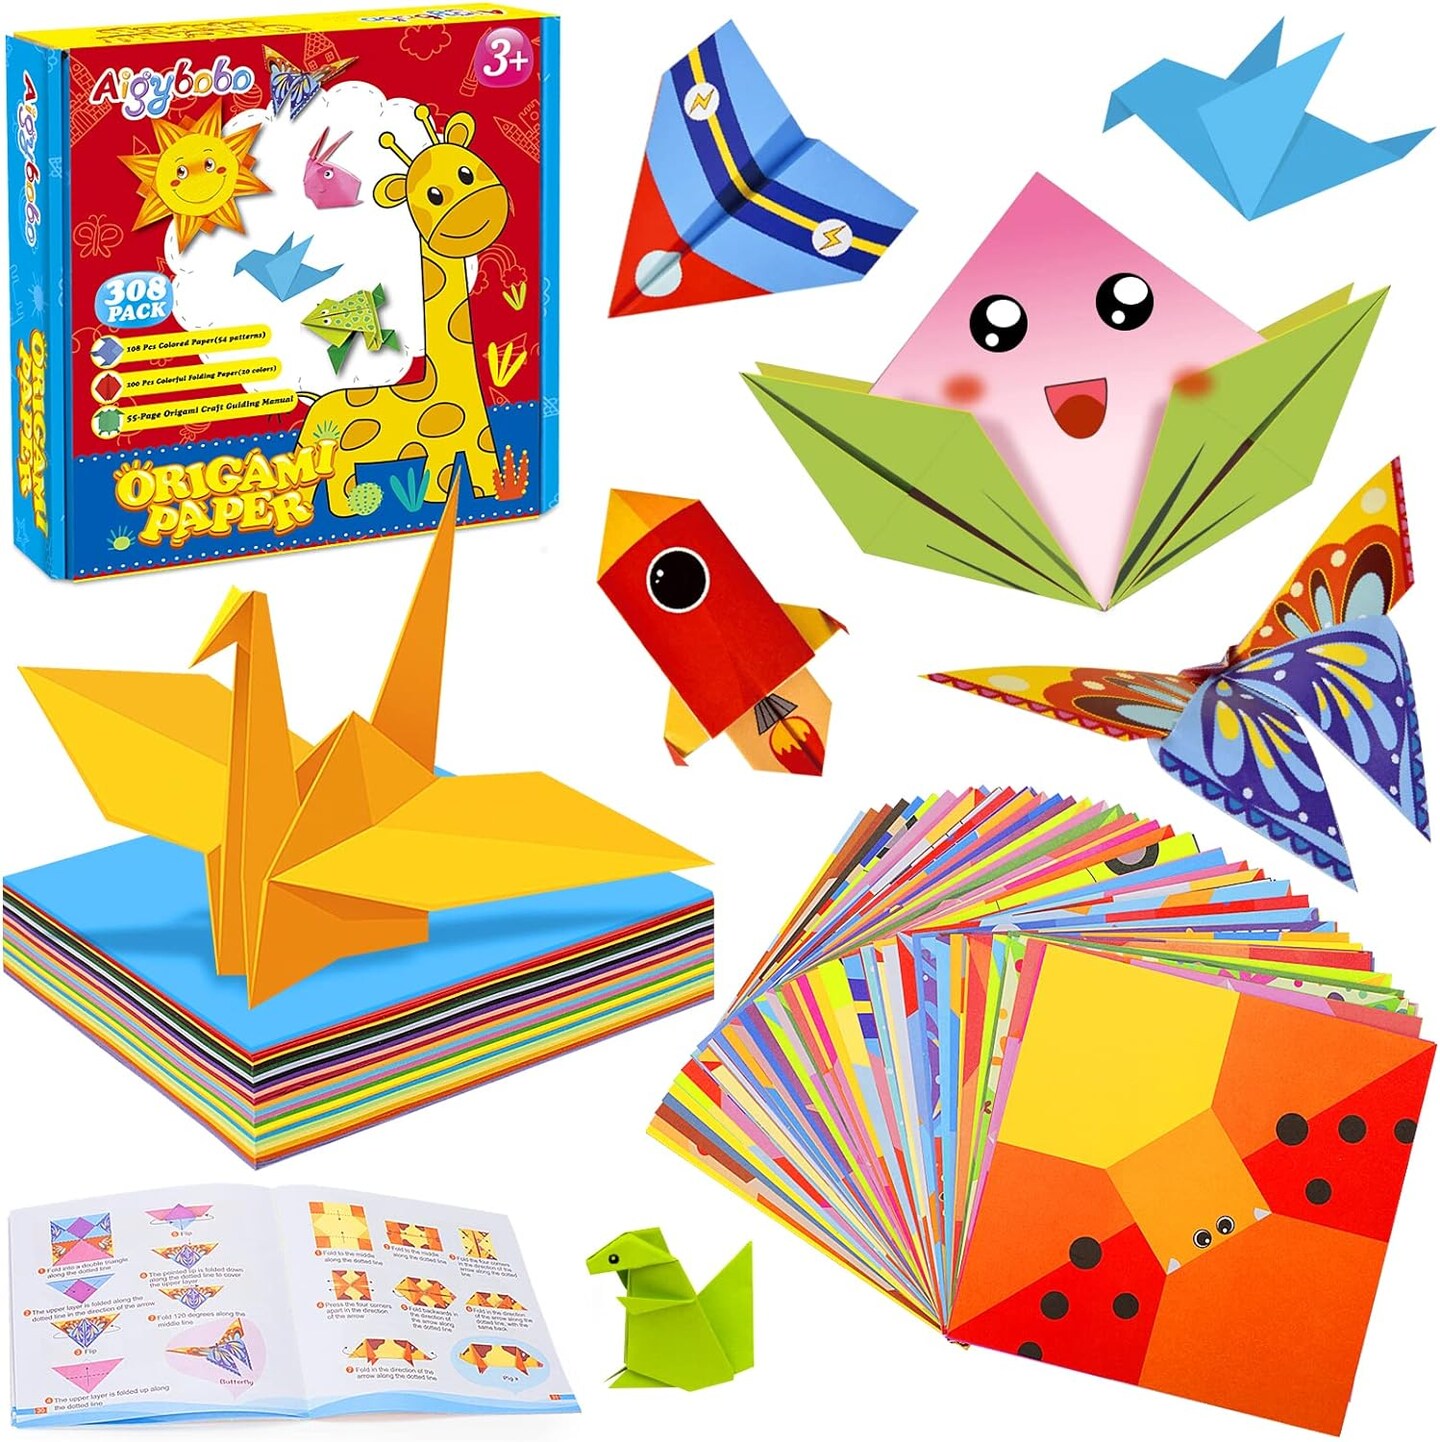 308-Pieces Origami Paper Set with Instruction Book